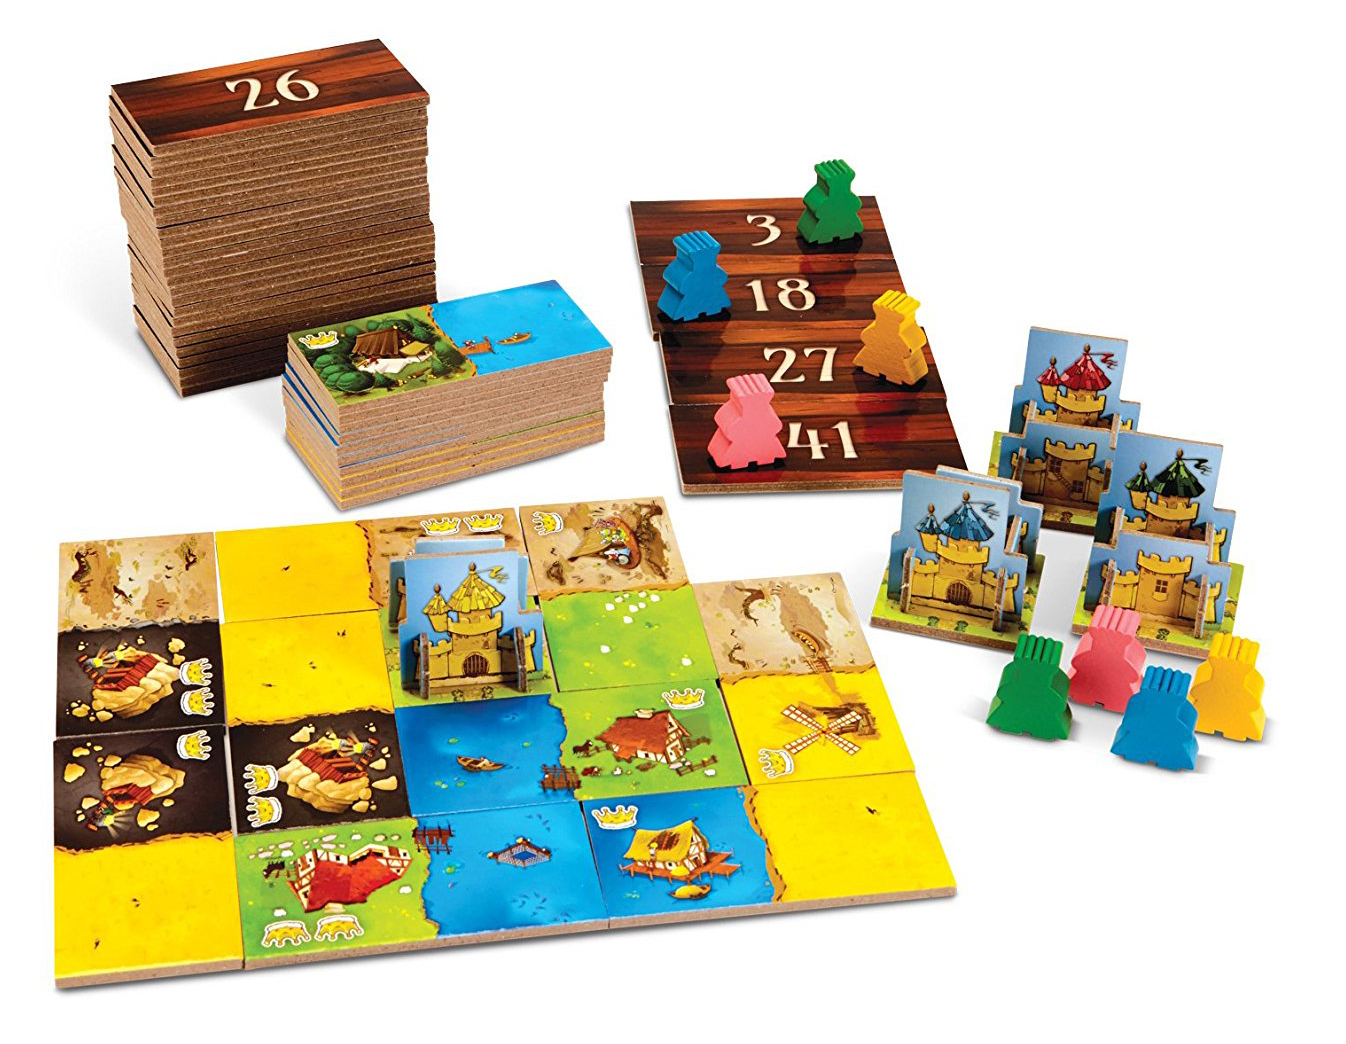 54-best-new-board-games-of-2017-for-every-person-on-your-list-toy-notes